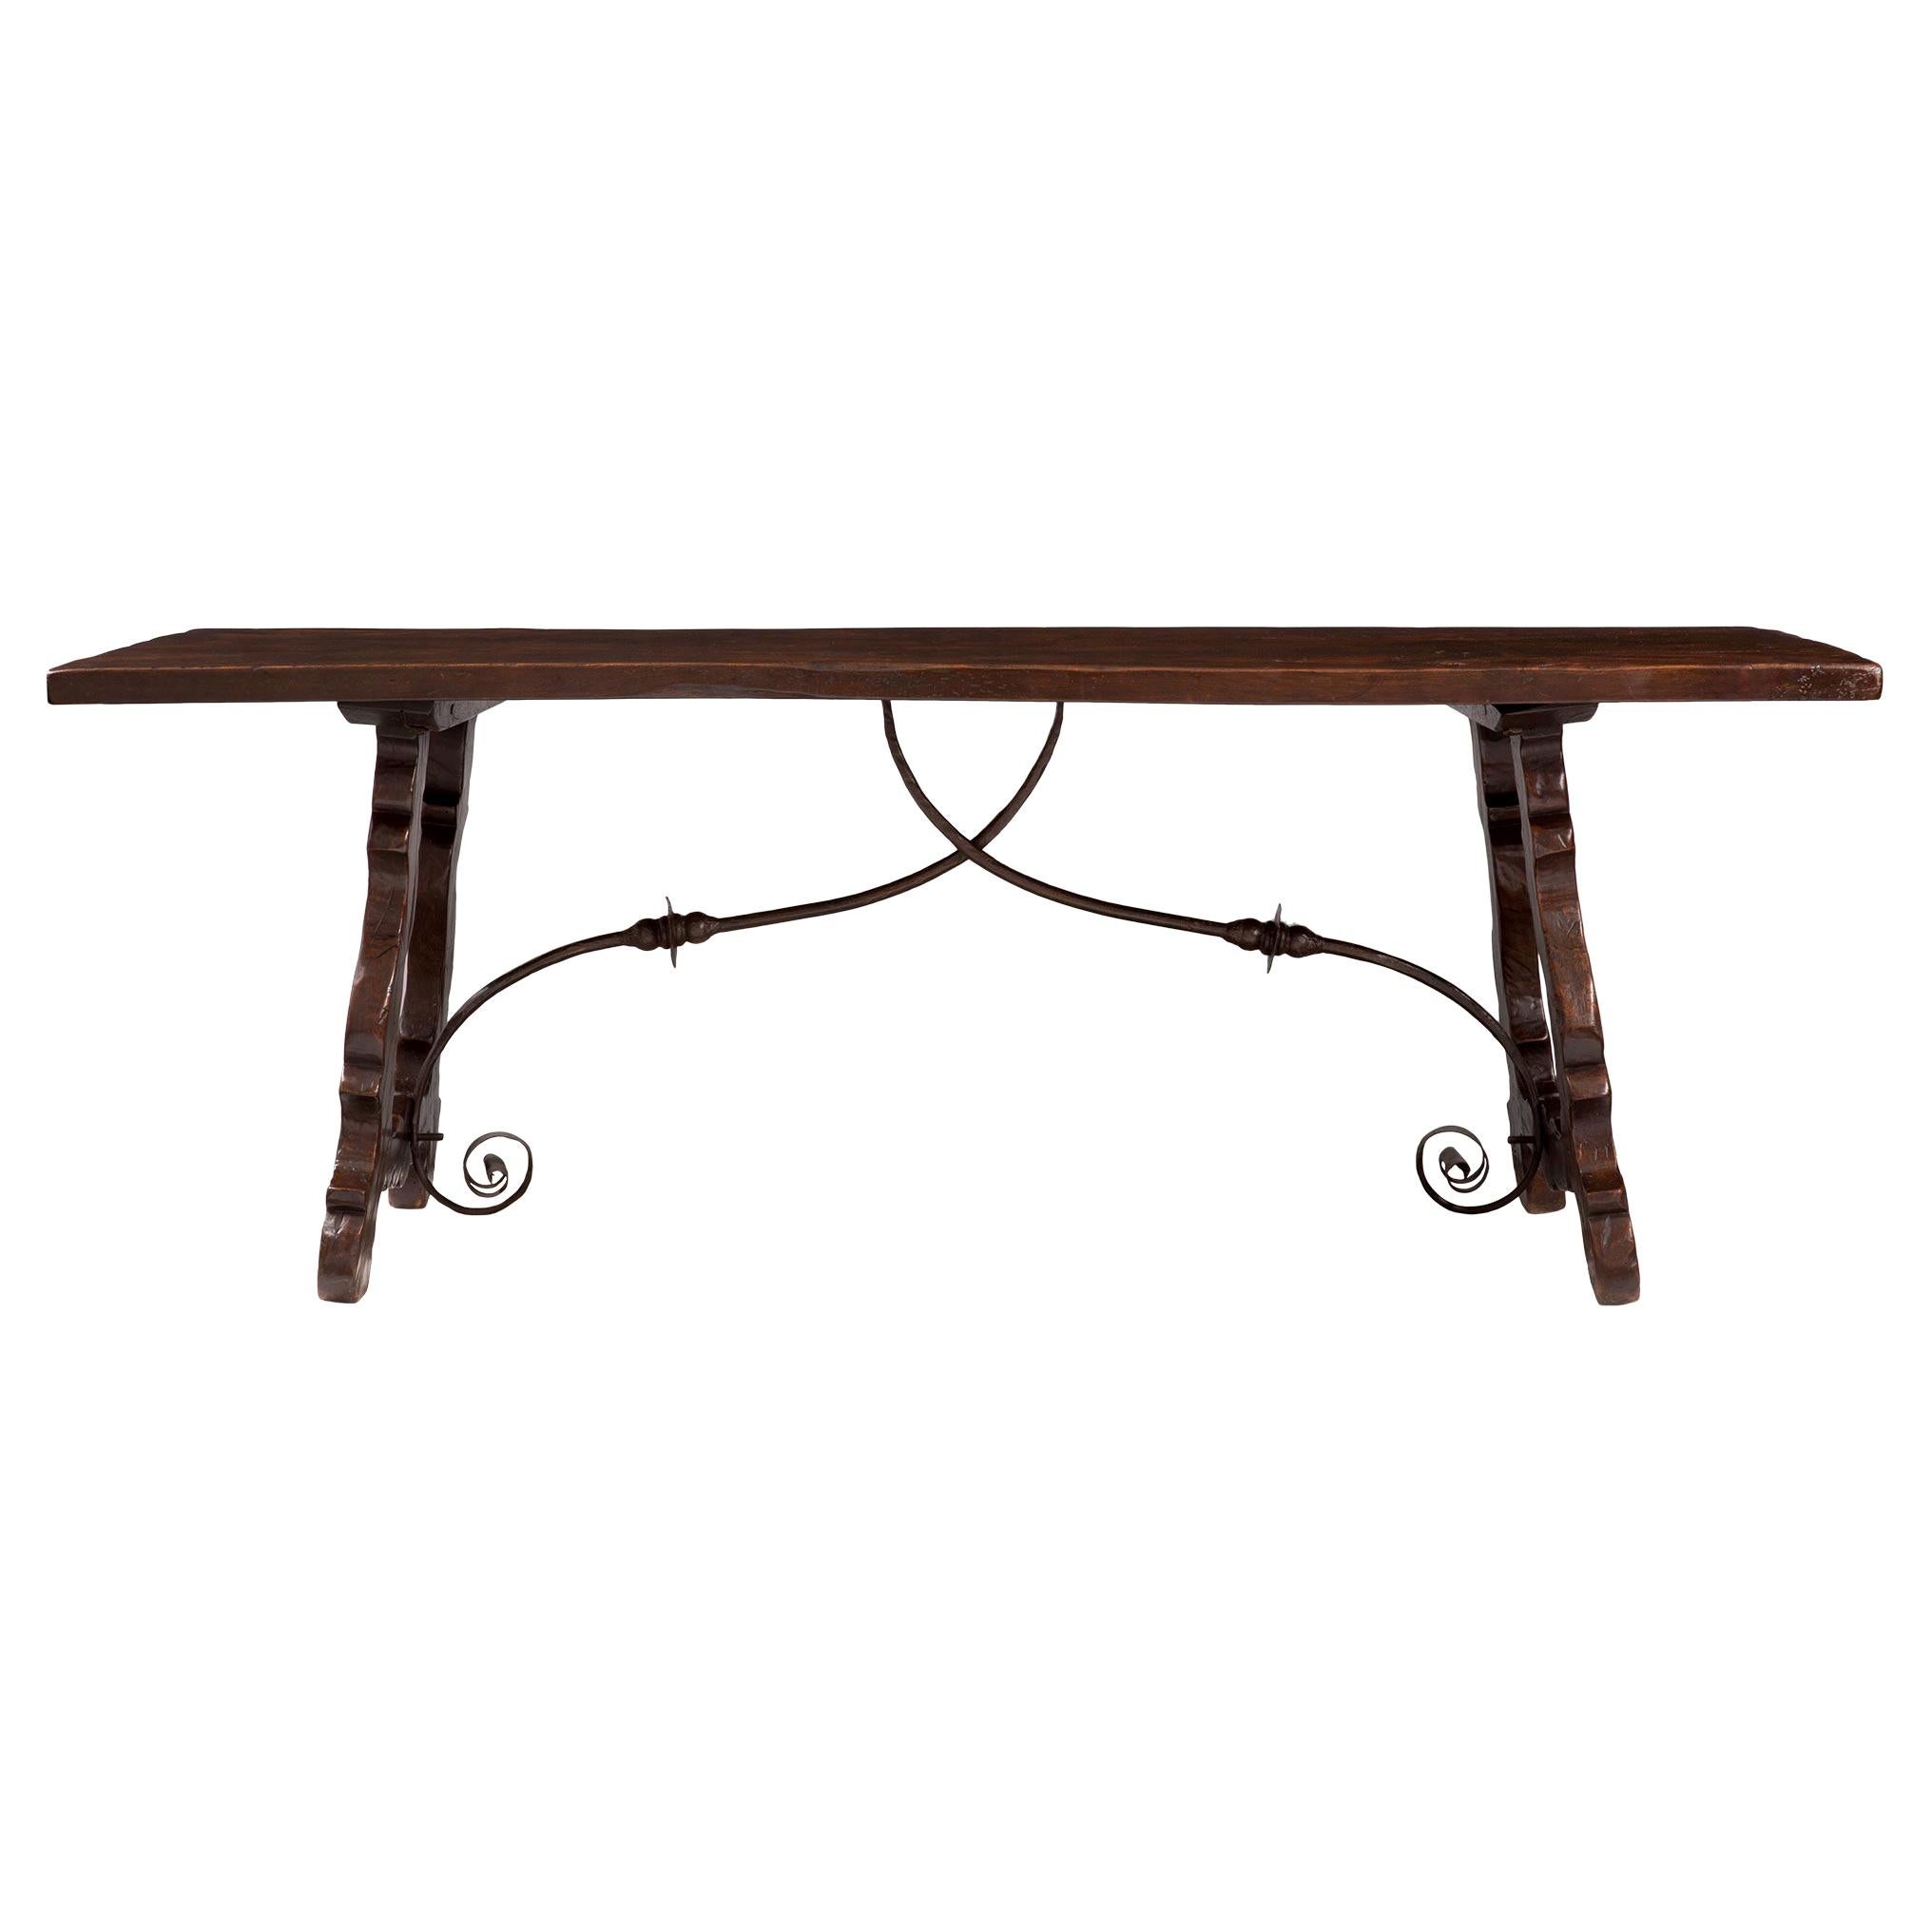 Spanish Mid-19th Century Country Style Dark Oak Trestle Dining/Center Table For Sale